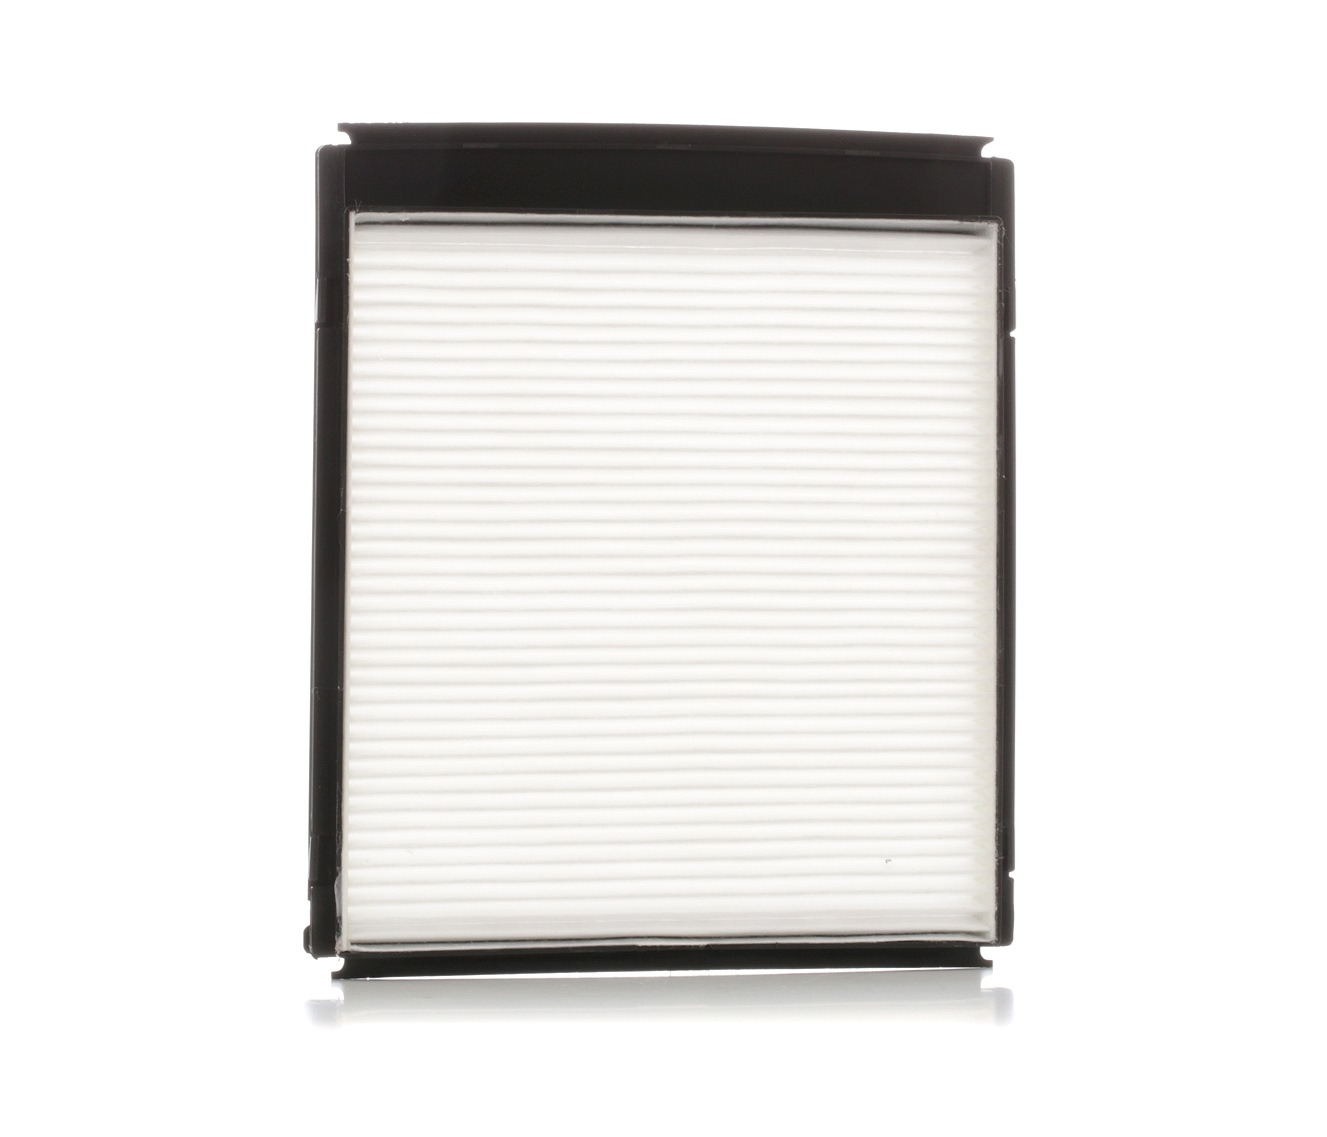 RIDEX Particulate Filter, 228 mm x 204 mm x 20 mm Width: 204mm, Height: 20mm, Length: 228mm Cabin filter 424I0302 buy